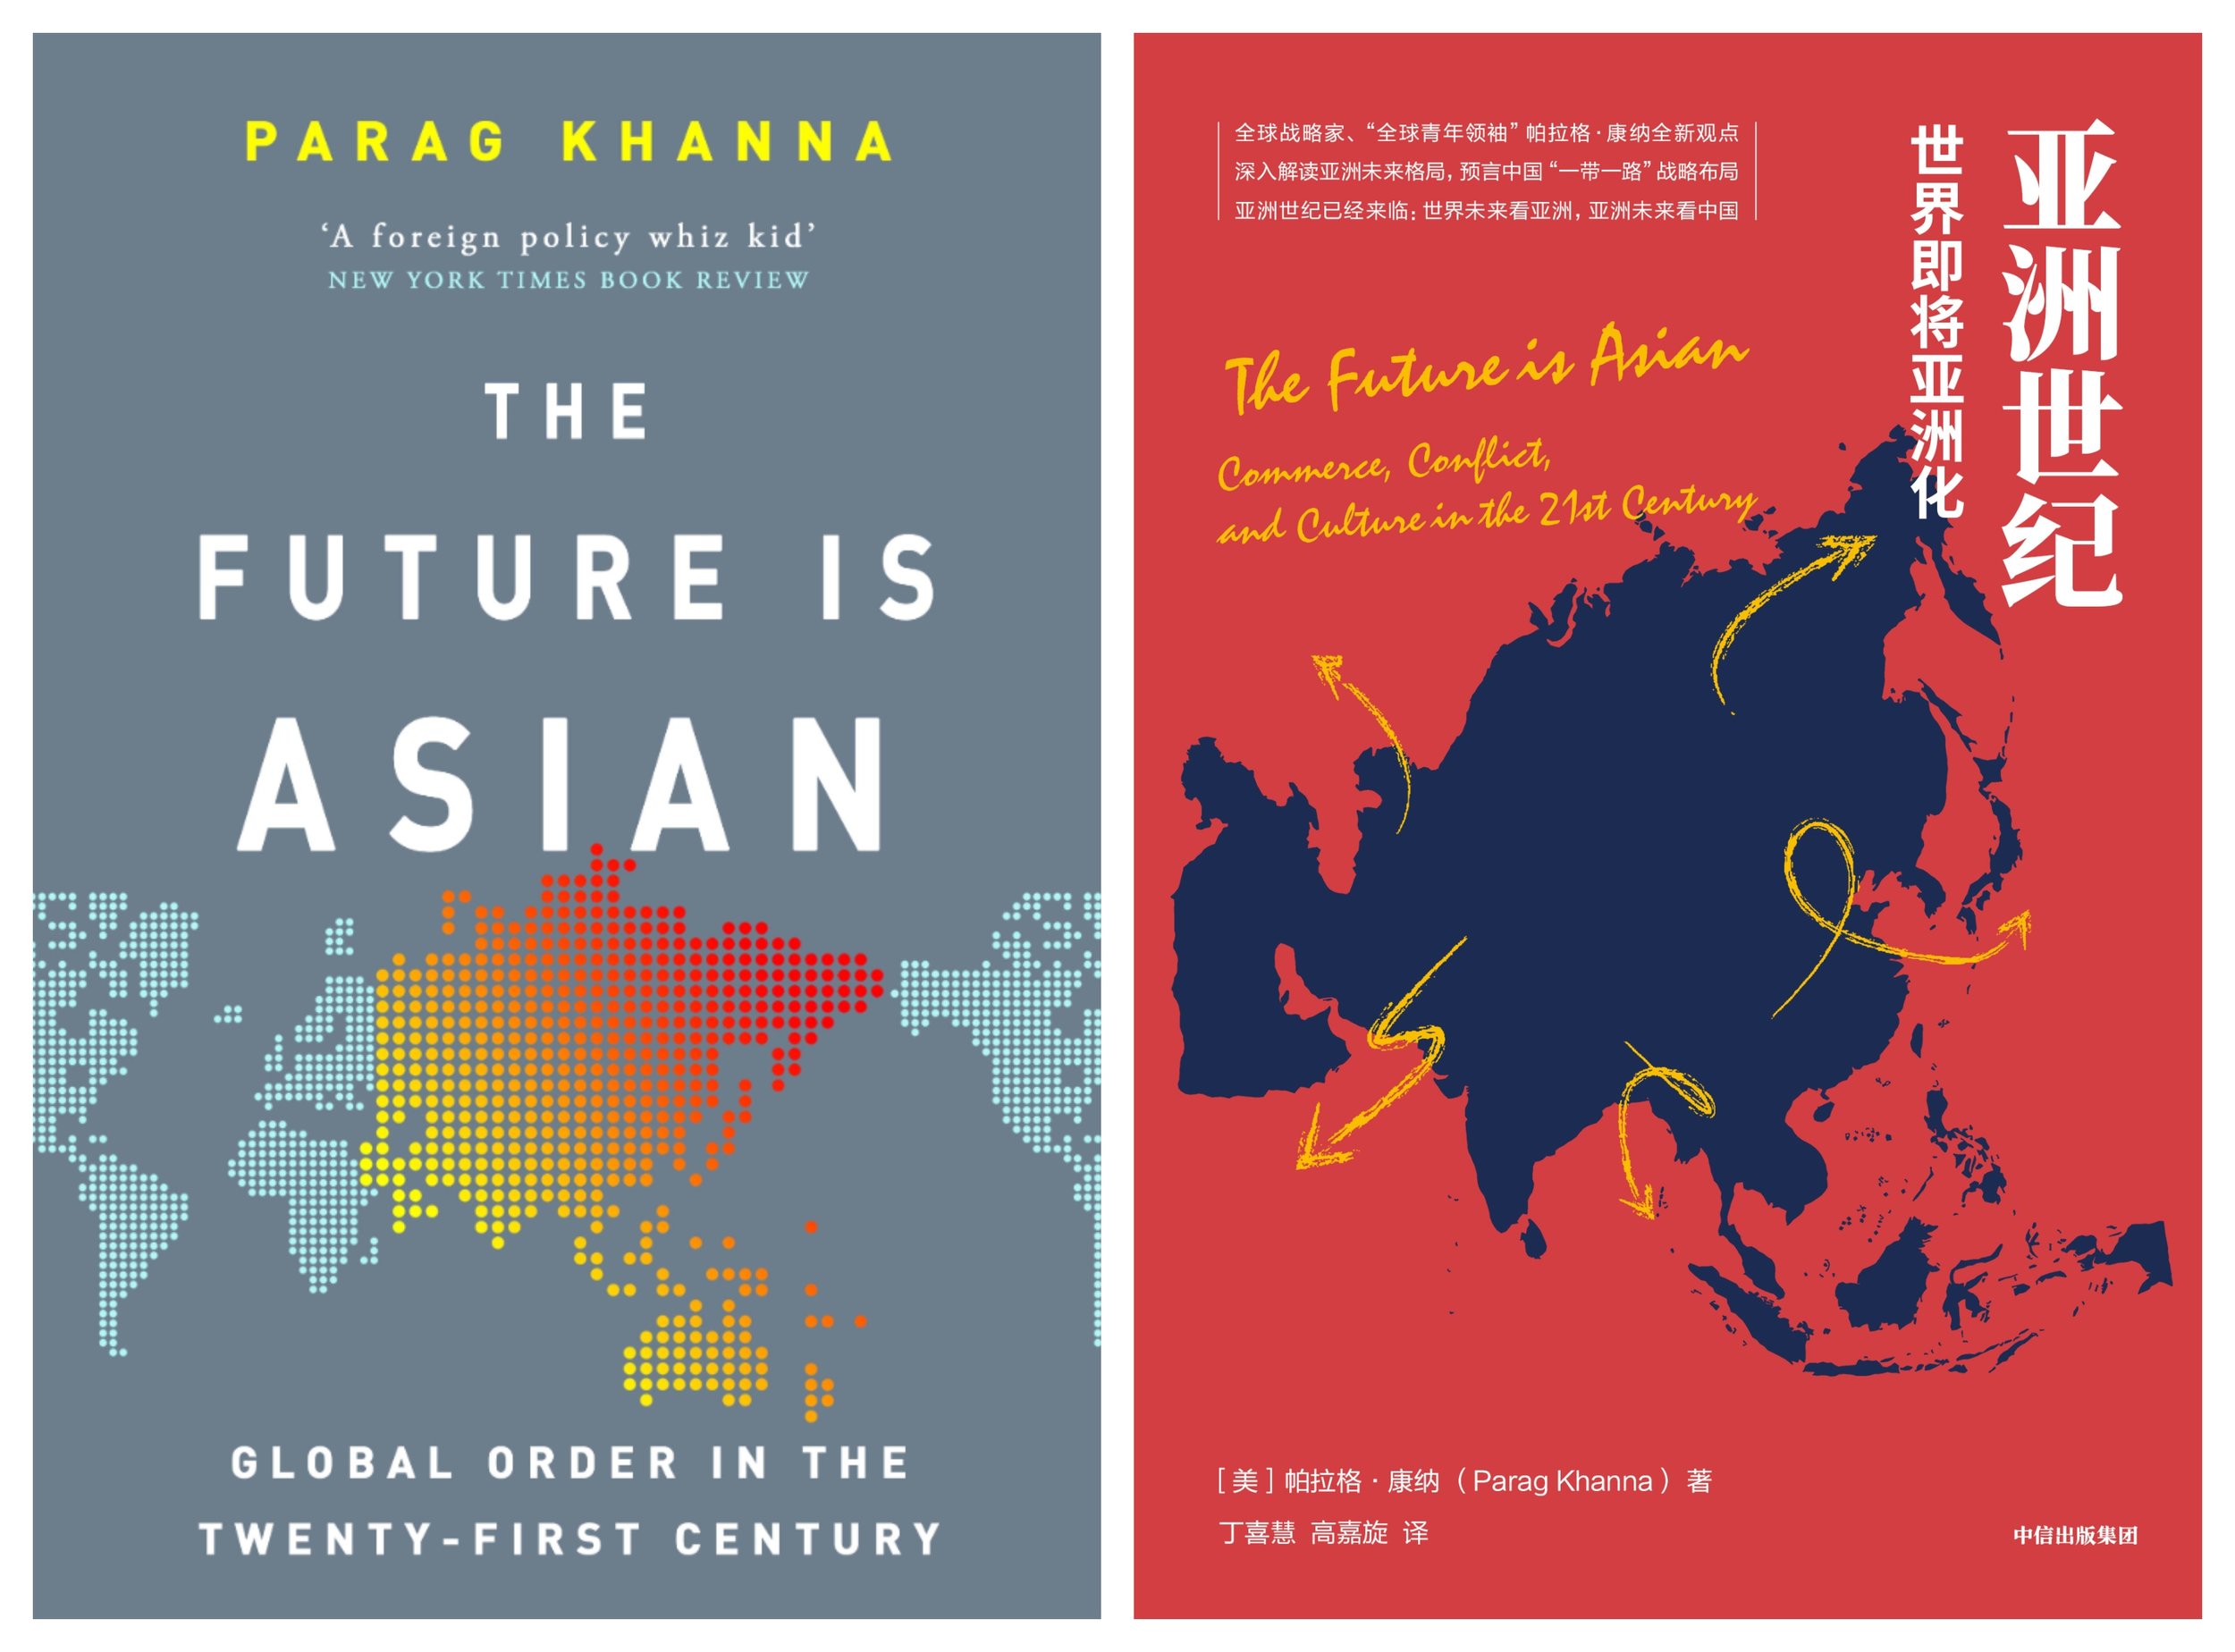  The Future Is Asian Book Covers by Parag Khanna 